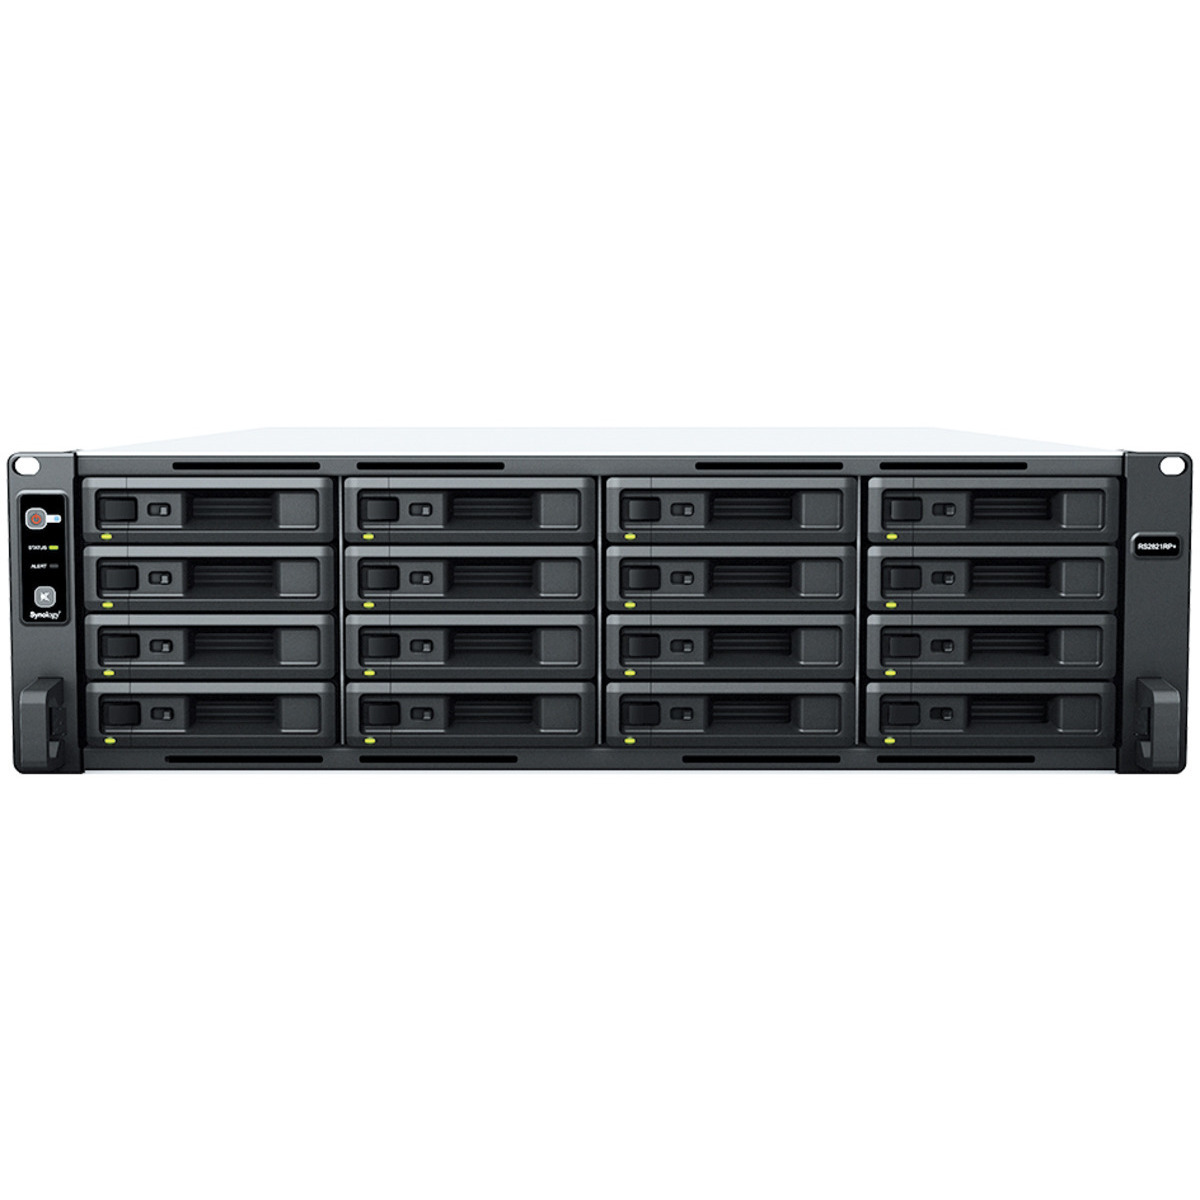 Synology RackStation RS2821RP+ 64tb 16-Bay RackMount Large Business / Enterprise NAS - Network Attached Storage Device 16x4tb Western Digital Red Plus WD40EFPX 3.5 5400rpm SATA 6Gb/s HDD NAS Class Drives Installed - Burn-In Tested RackStation RS2821RP+